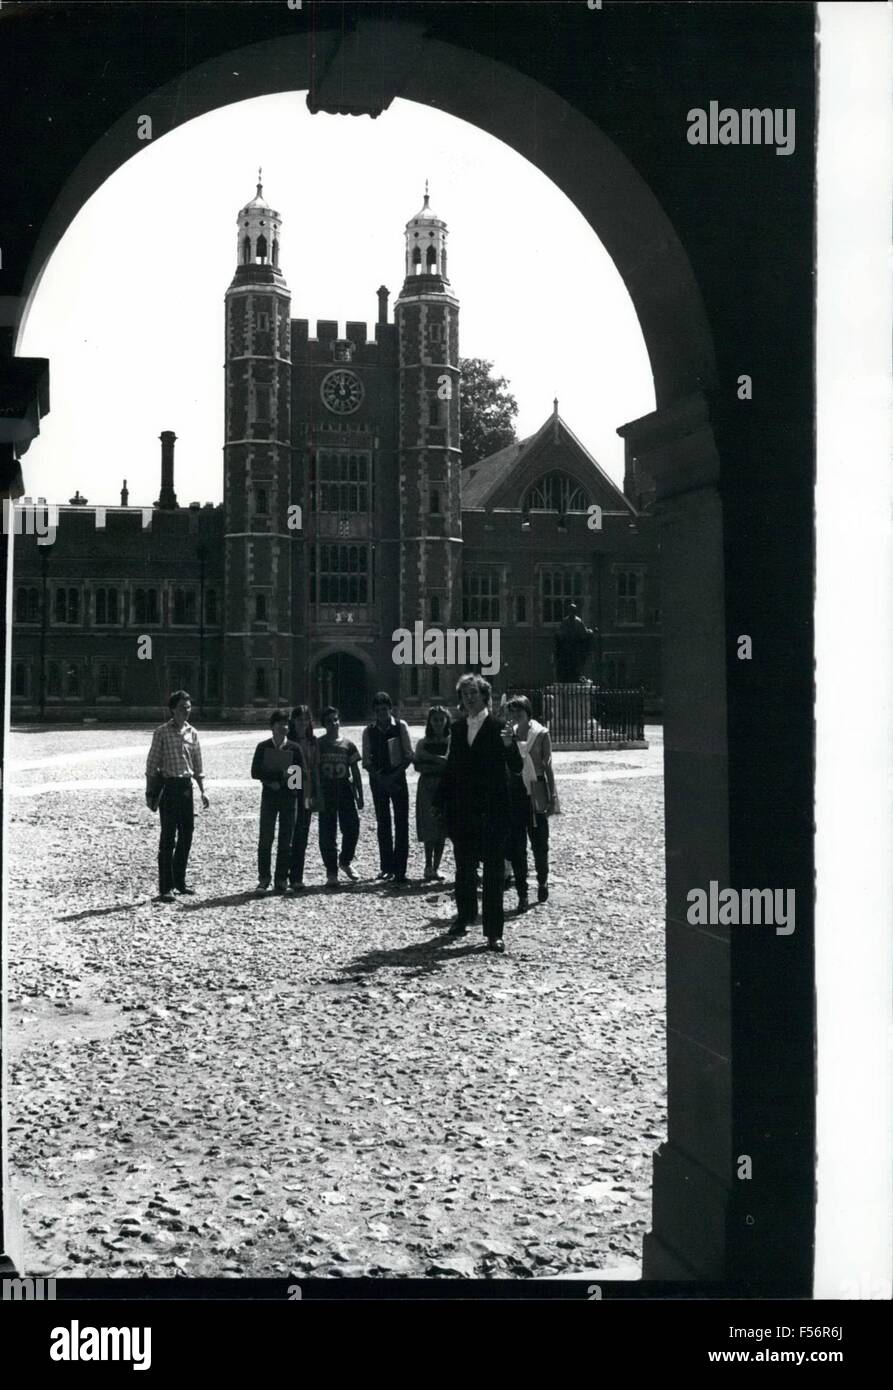 1962 - Foreigners take over eton: Most people would like to be able to say that they studied at Eton, probably the most famous school in the world numbering twenty Prime Ministers and famous writers such as Shelley, Fielding, Huxley and Orwell amongst its ex-pupils. Now the College is opening its gates for summer holiday courses which will give many people a chance to fulfill their wish, even if it is only for a week or fortnight. More than 200 foreign students, aged 13 to 24, are living for three holiday weeks in the College's studying English and enjoying sports facilities supervised by Eton Stock Photo